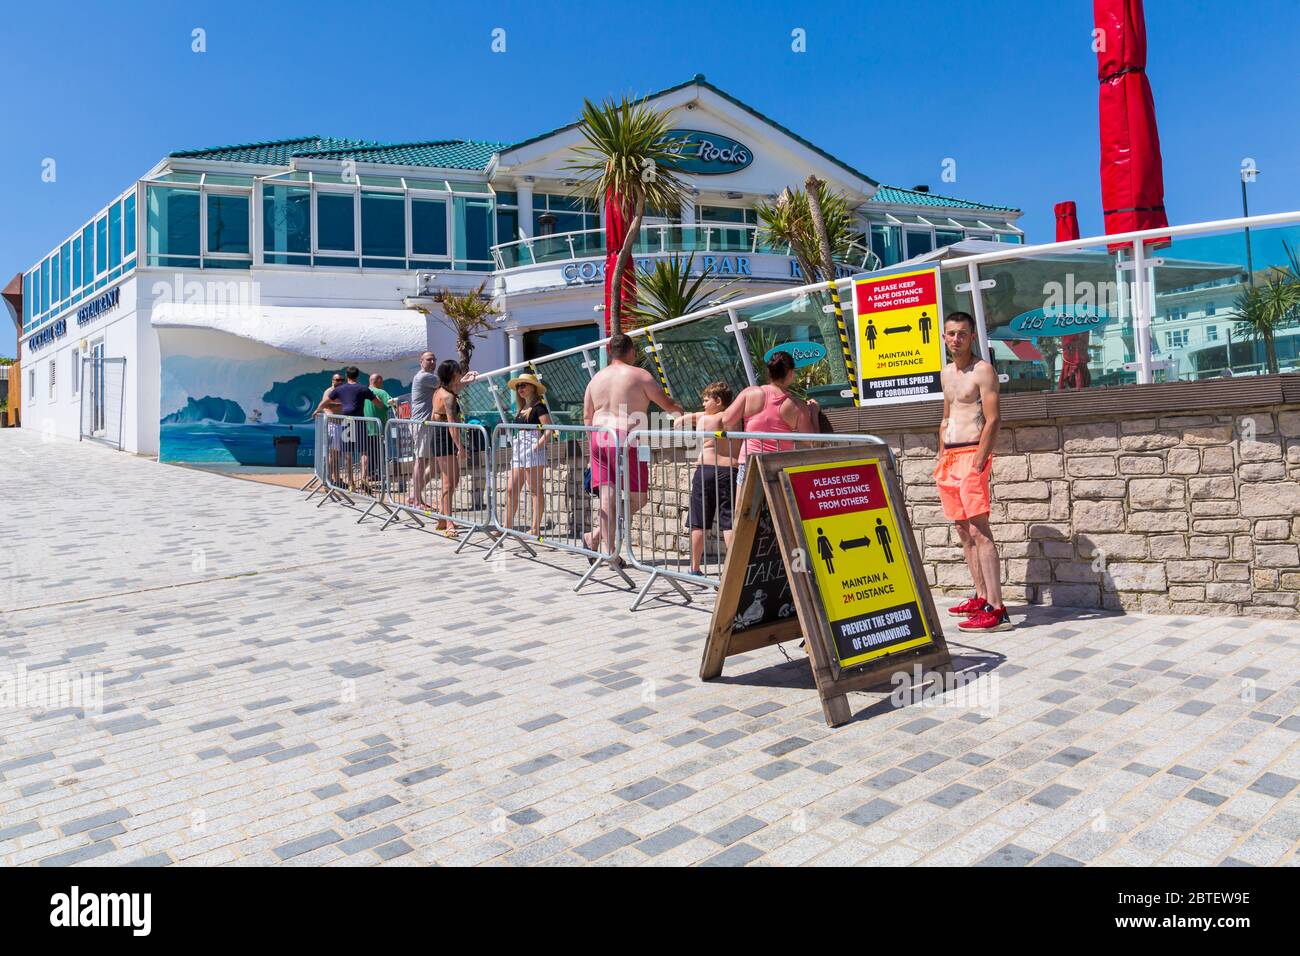 Bournemouth, Dorset UK. 25th May 2020. Social distancing as visitors queue for drinks and take away pizzas at Hot Rocks on a scorching hot day at Bournemouth beaches with clear blue skies and unbroken sunshine, as temperatures soar on Bank Holiday Monday. Sunseekers flock to the seaside and beaches are packed. Credit: Carolyn Jenkins/Alamy Live News Stock Photo